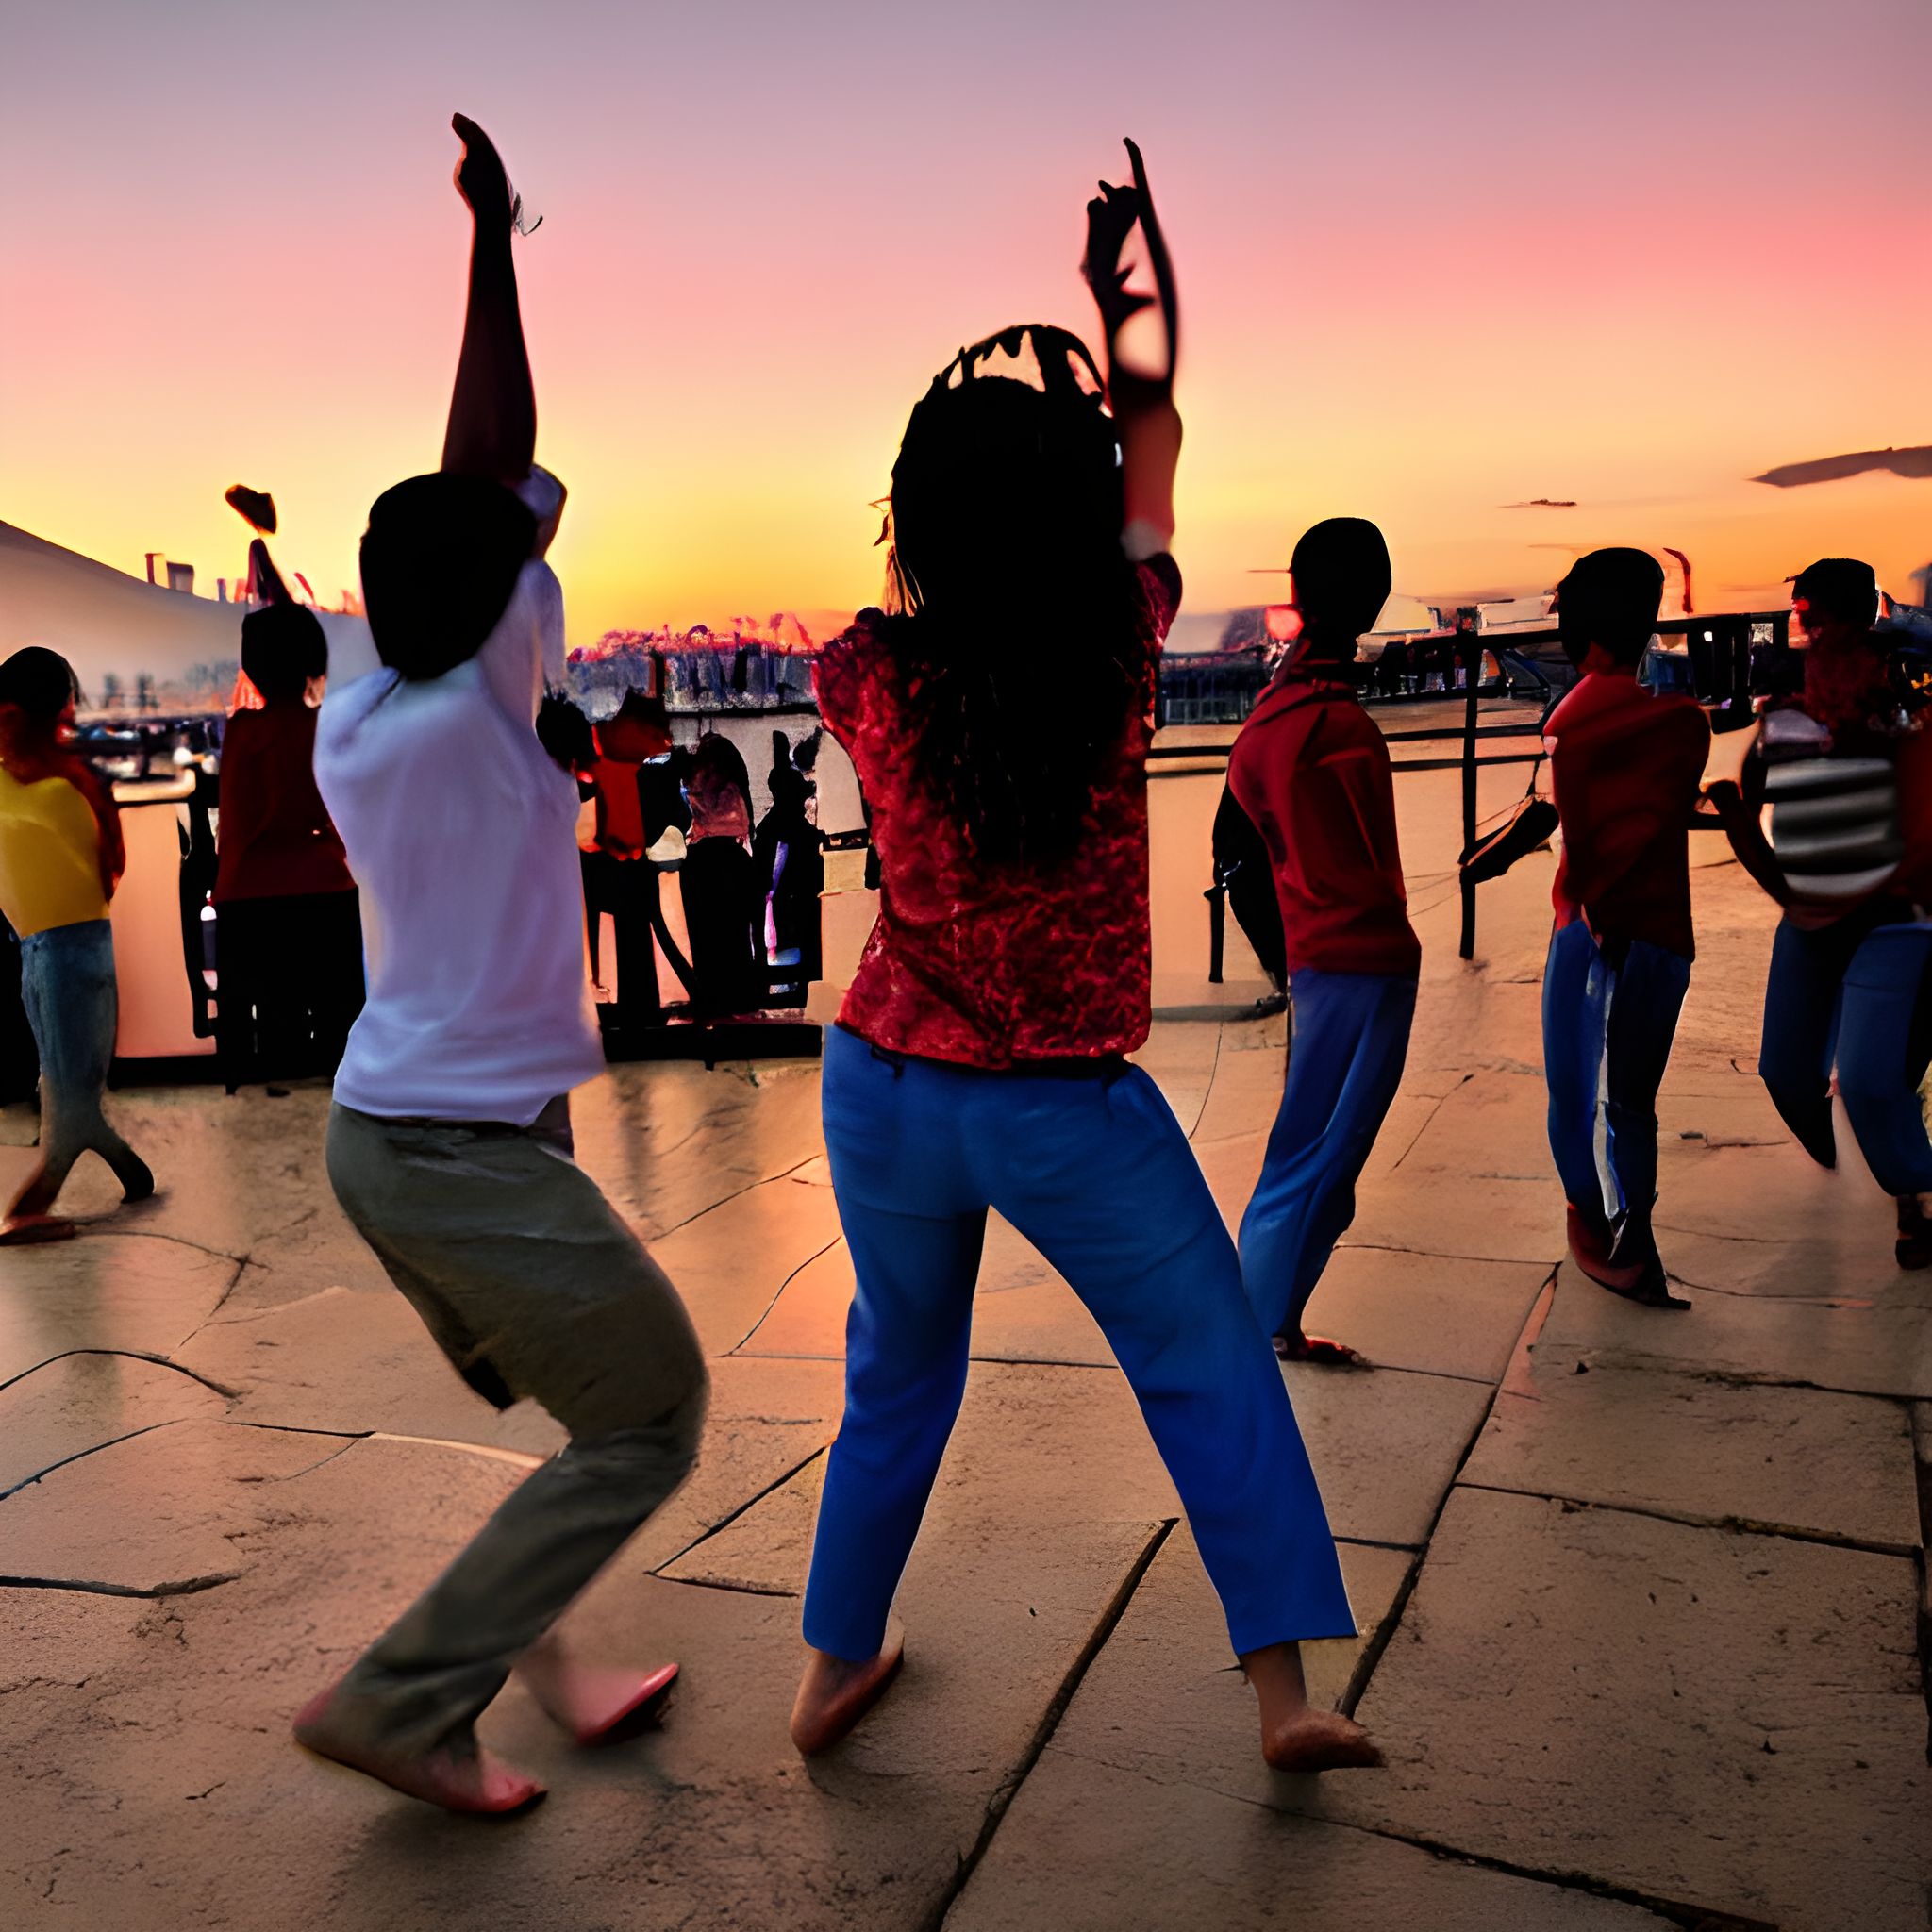 Dancing people in the evening, seen from back, sunset, Canon EOS 1000D, ƒ/3.5, Focal length: 18.0 mm, Exposure time: 1/5, ISO 400, Flash on